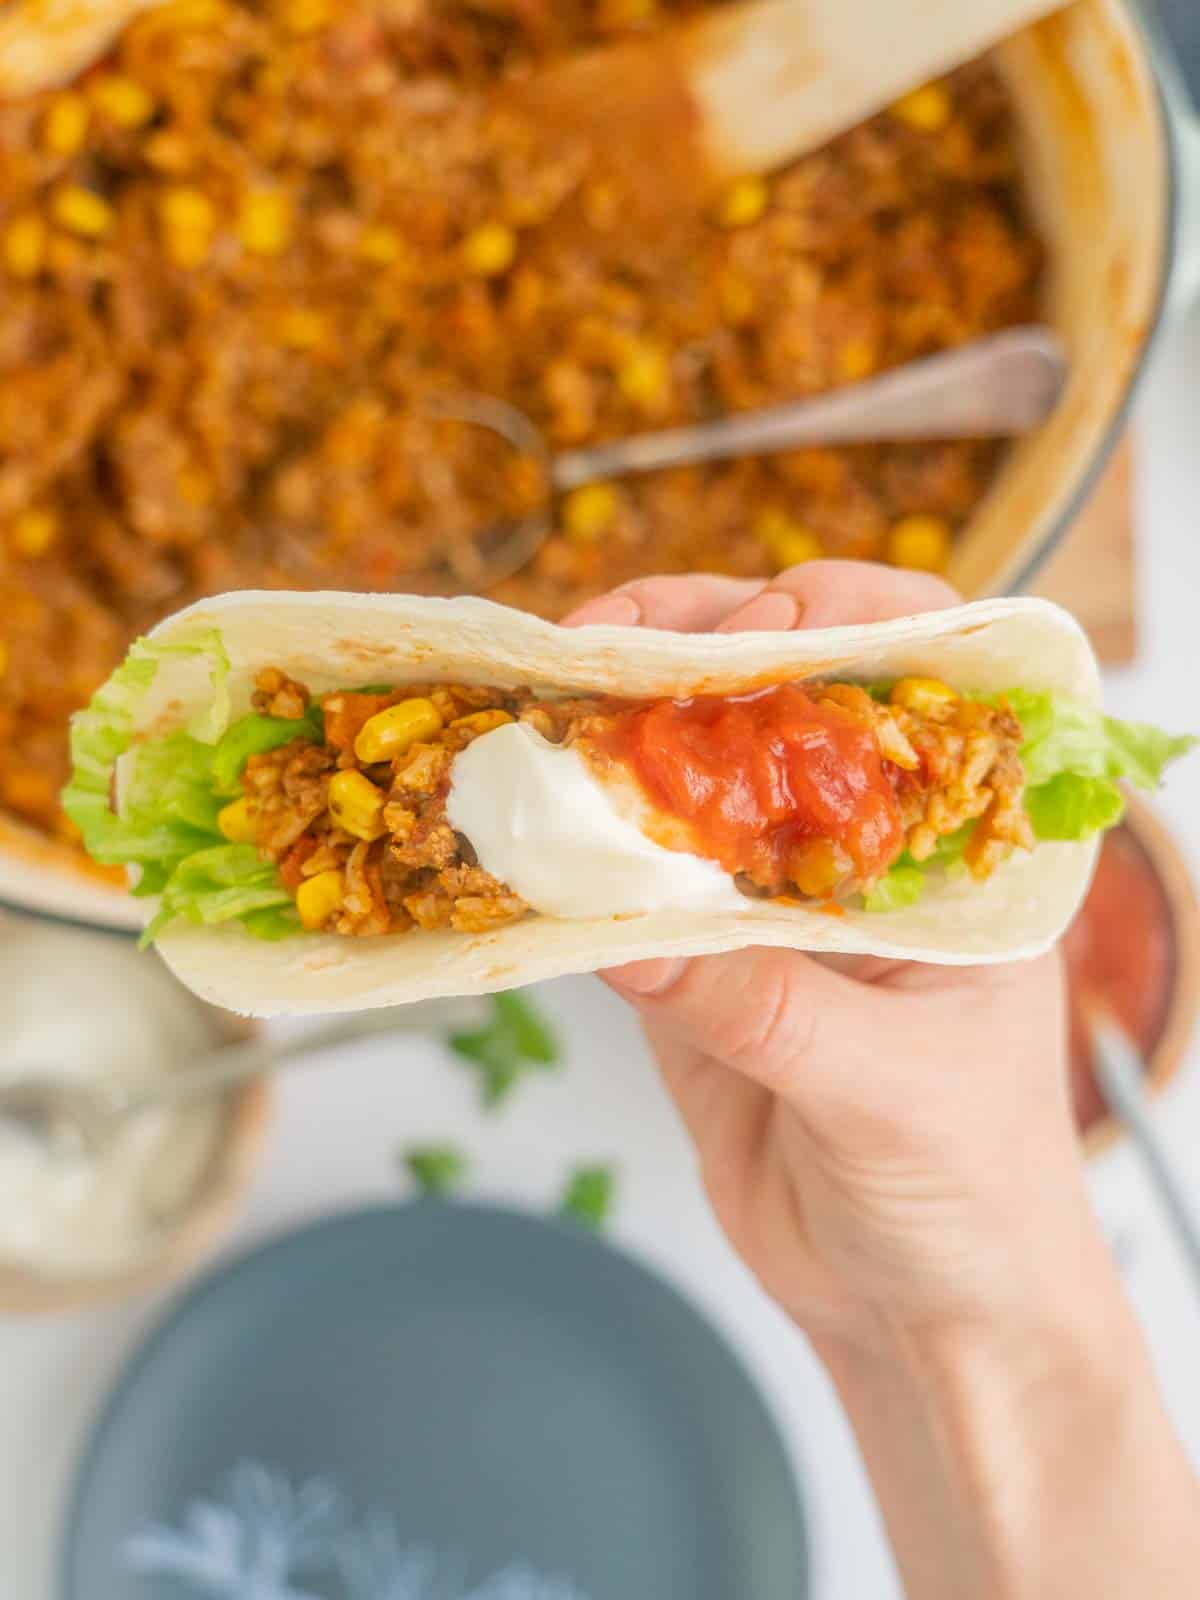 A hand holding a taco filled with mince, rice, corn, lettuce and salsa.